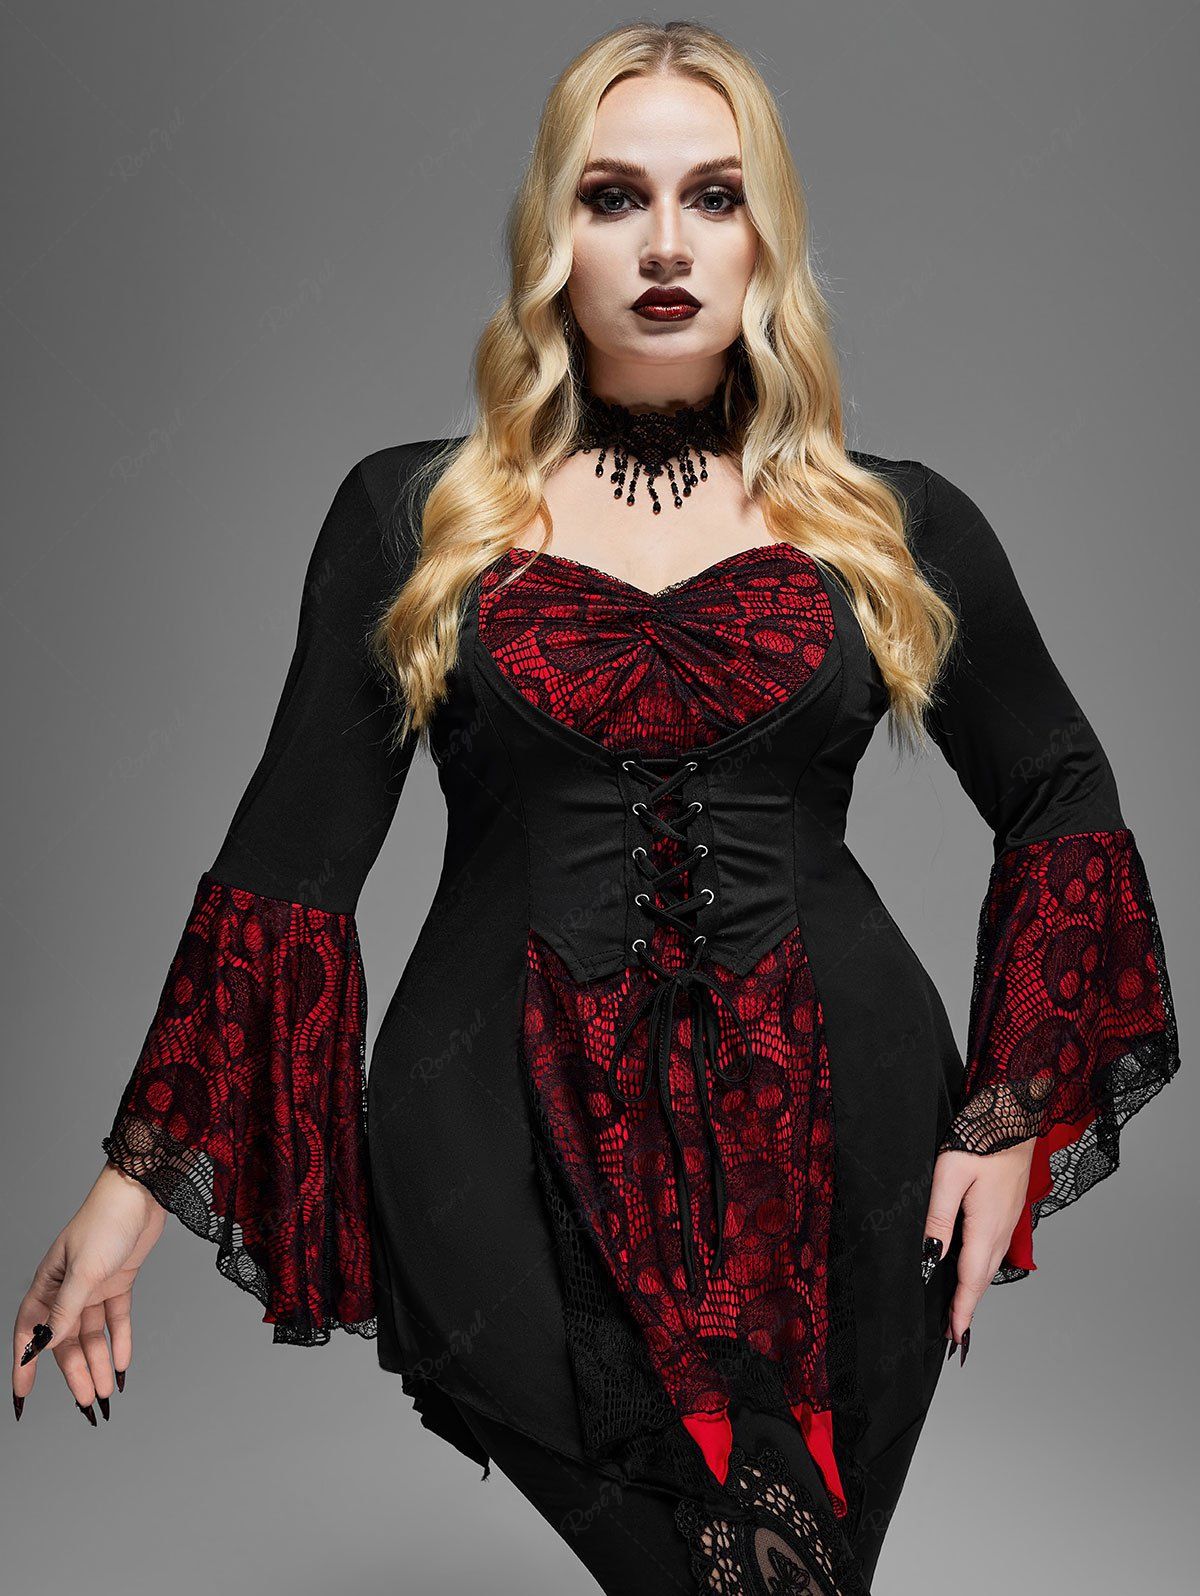 Gothic Bell Sleeve Skull Lace Handkerchief Long Sleeve Blouse Top